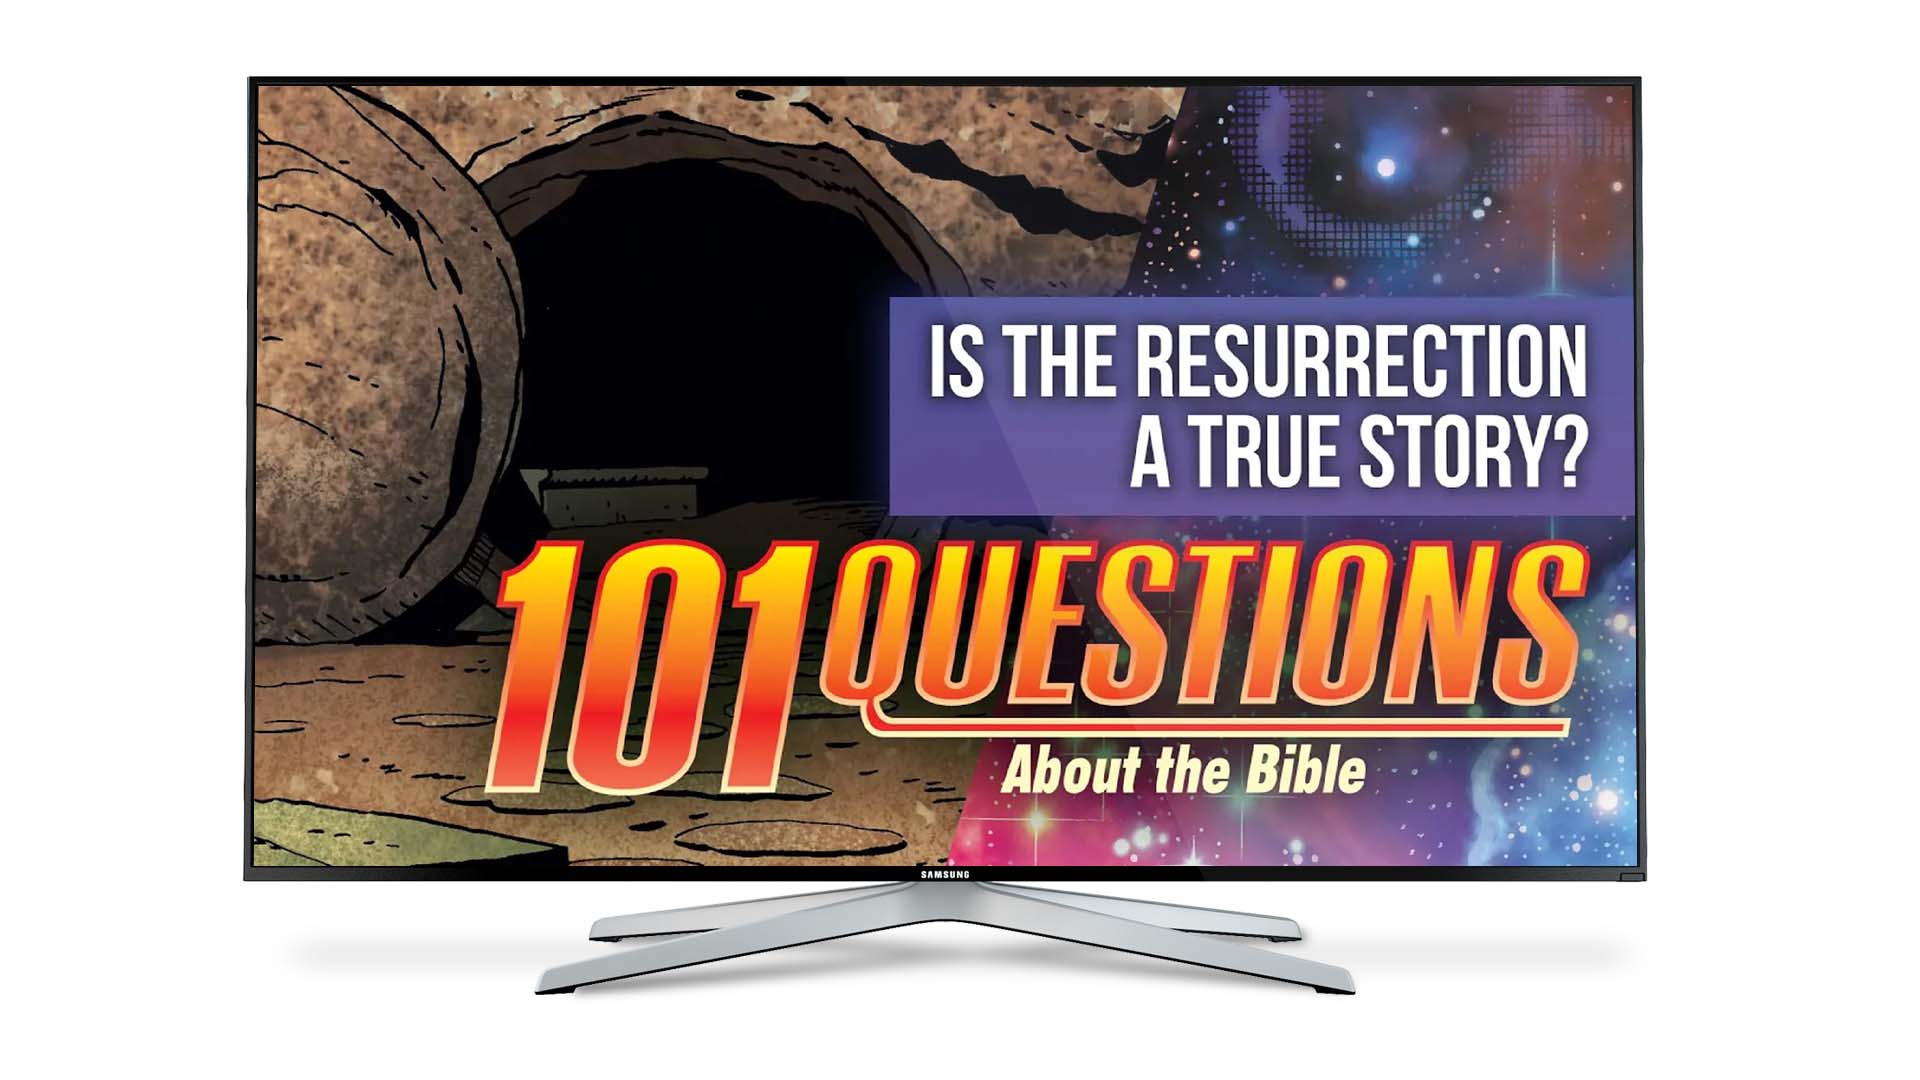 Motion Comic: 101 Questions #5 - How do we know the resurrection is true?